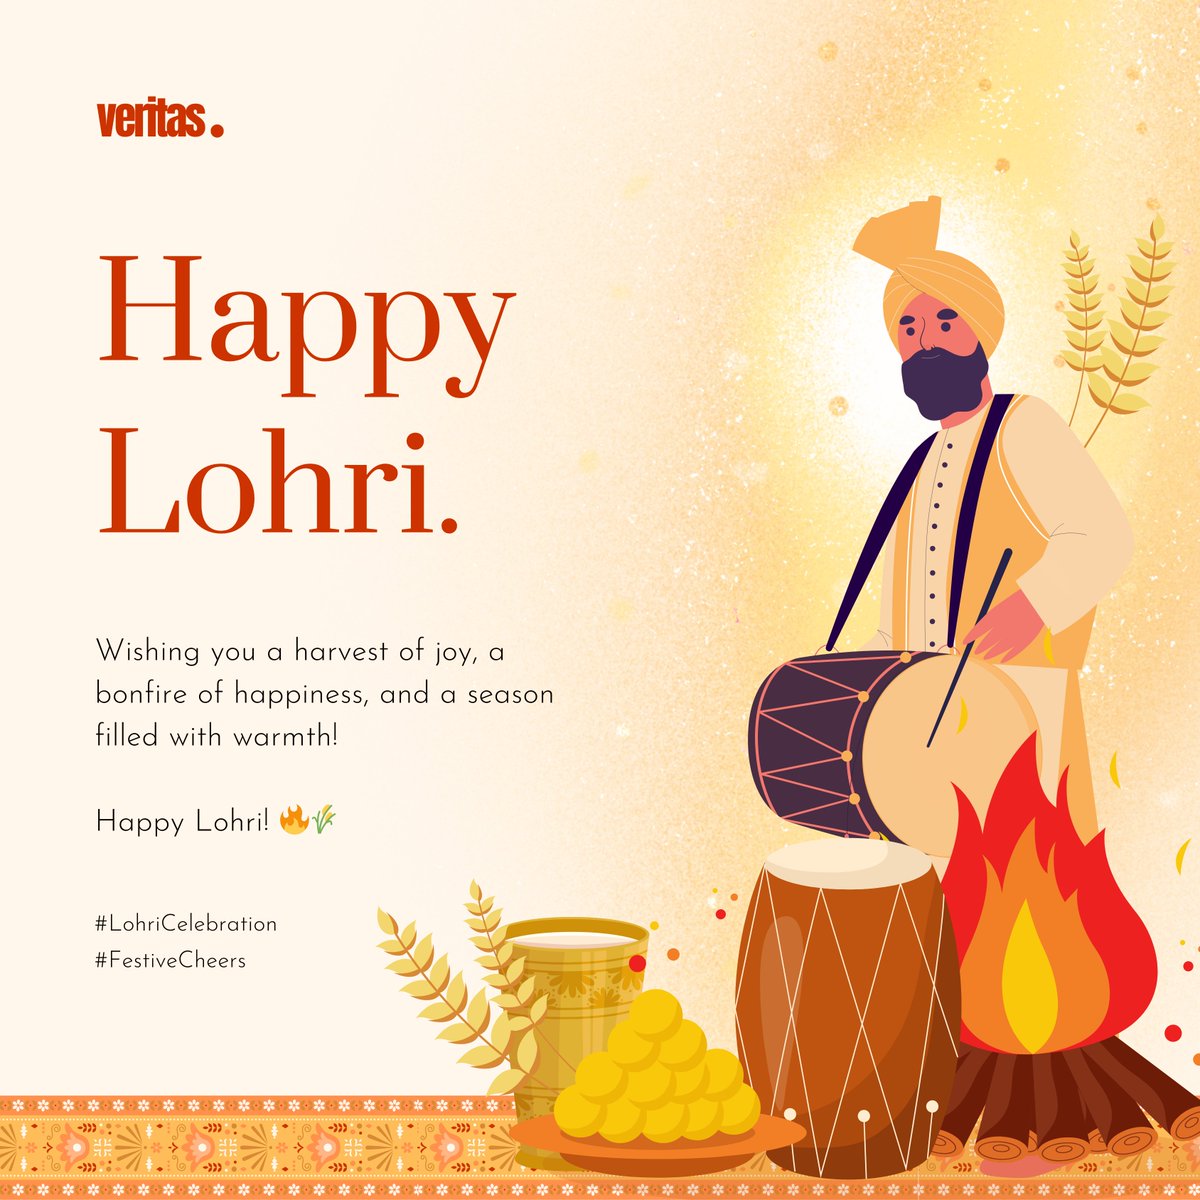 We hope everyone has a happy and prosperous #Lohri in 2024! 🔥 
 
May your life be full of plenty, joy, and prosperity as we celebrate the coziness of the bonfire and the sweetness of gur and rewari.
 
From all of us at Veritas, happy #Lohri! 🌼